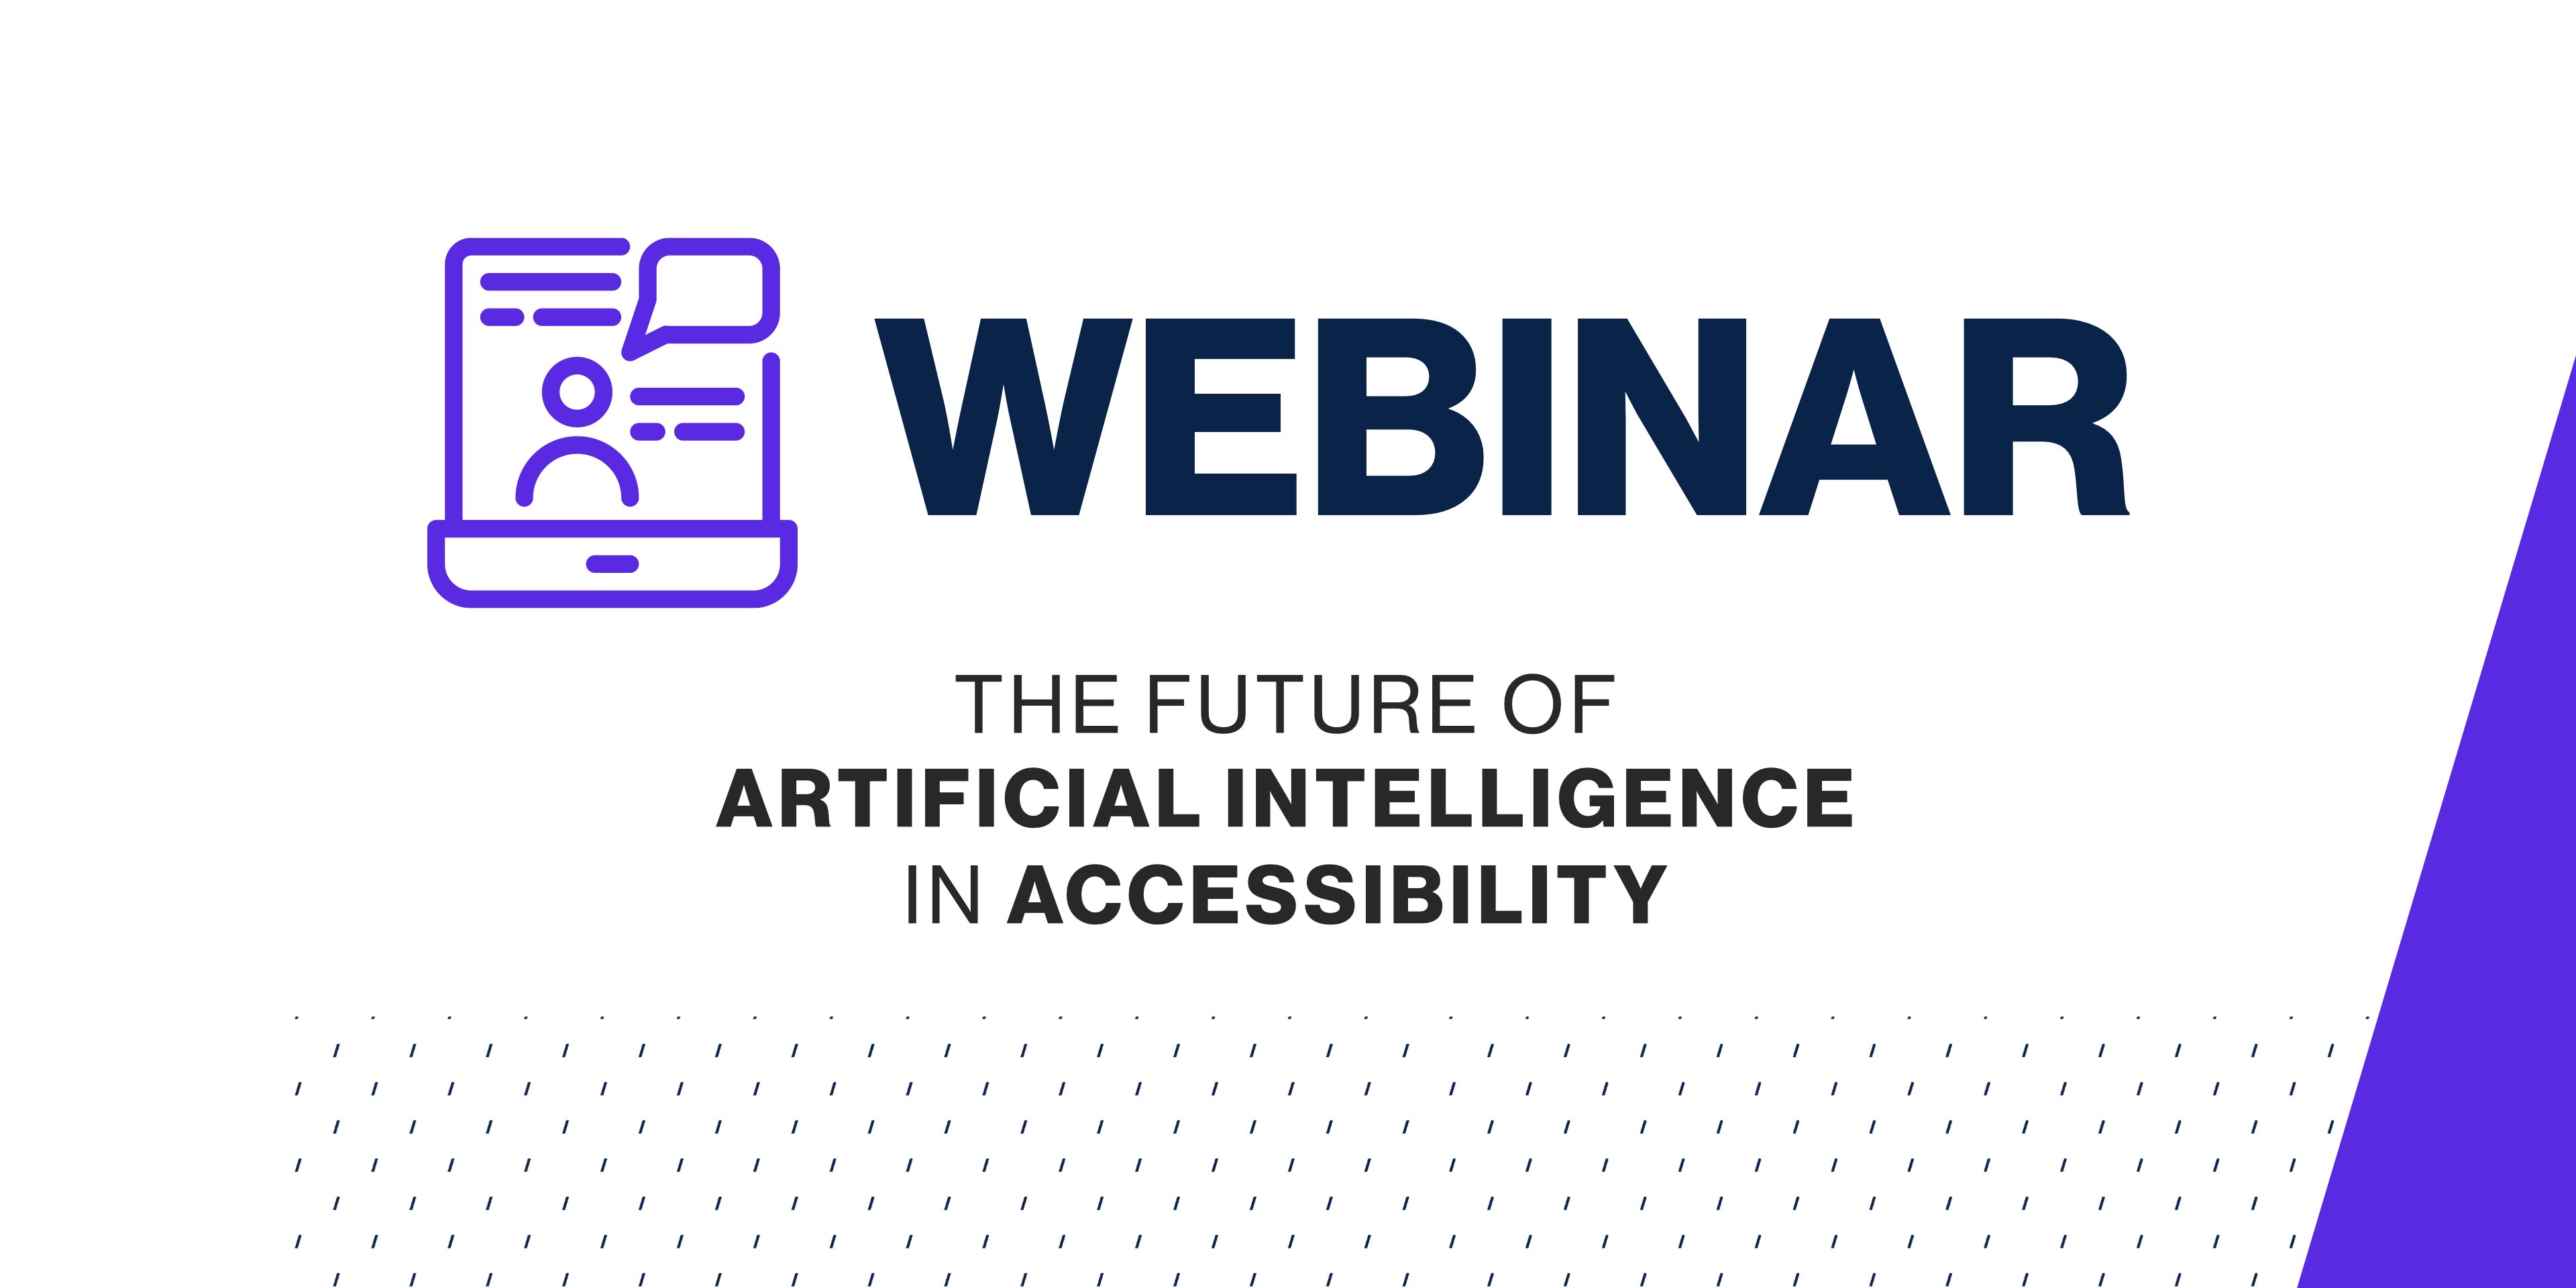 webinar's cover photo that says "The Future of Artificial Intelligence in Accessibility"